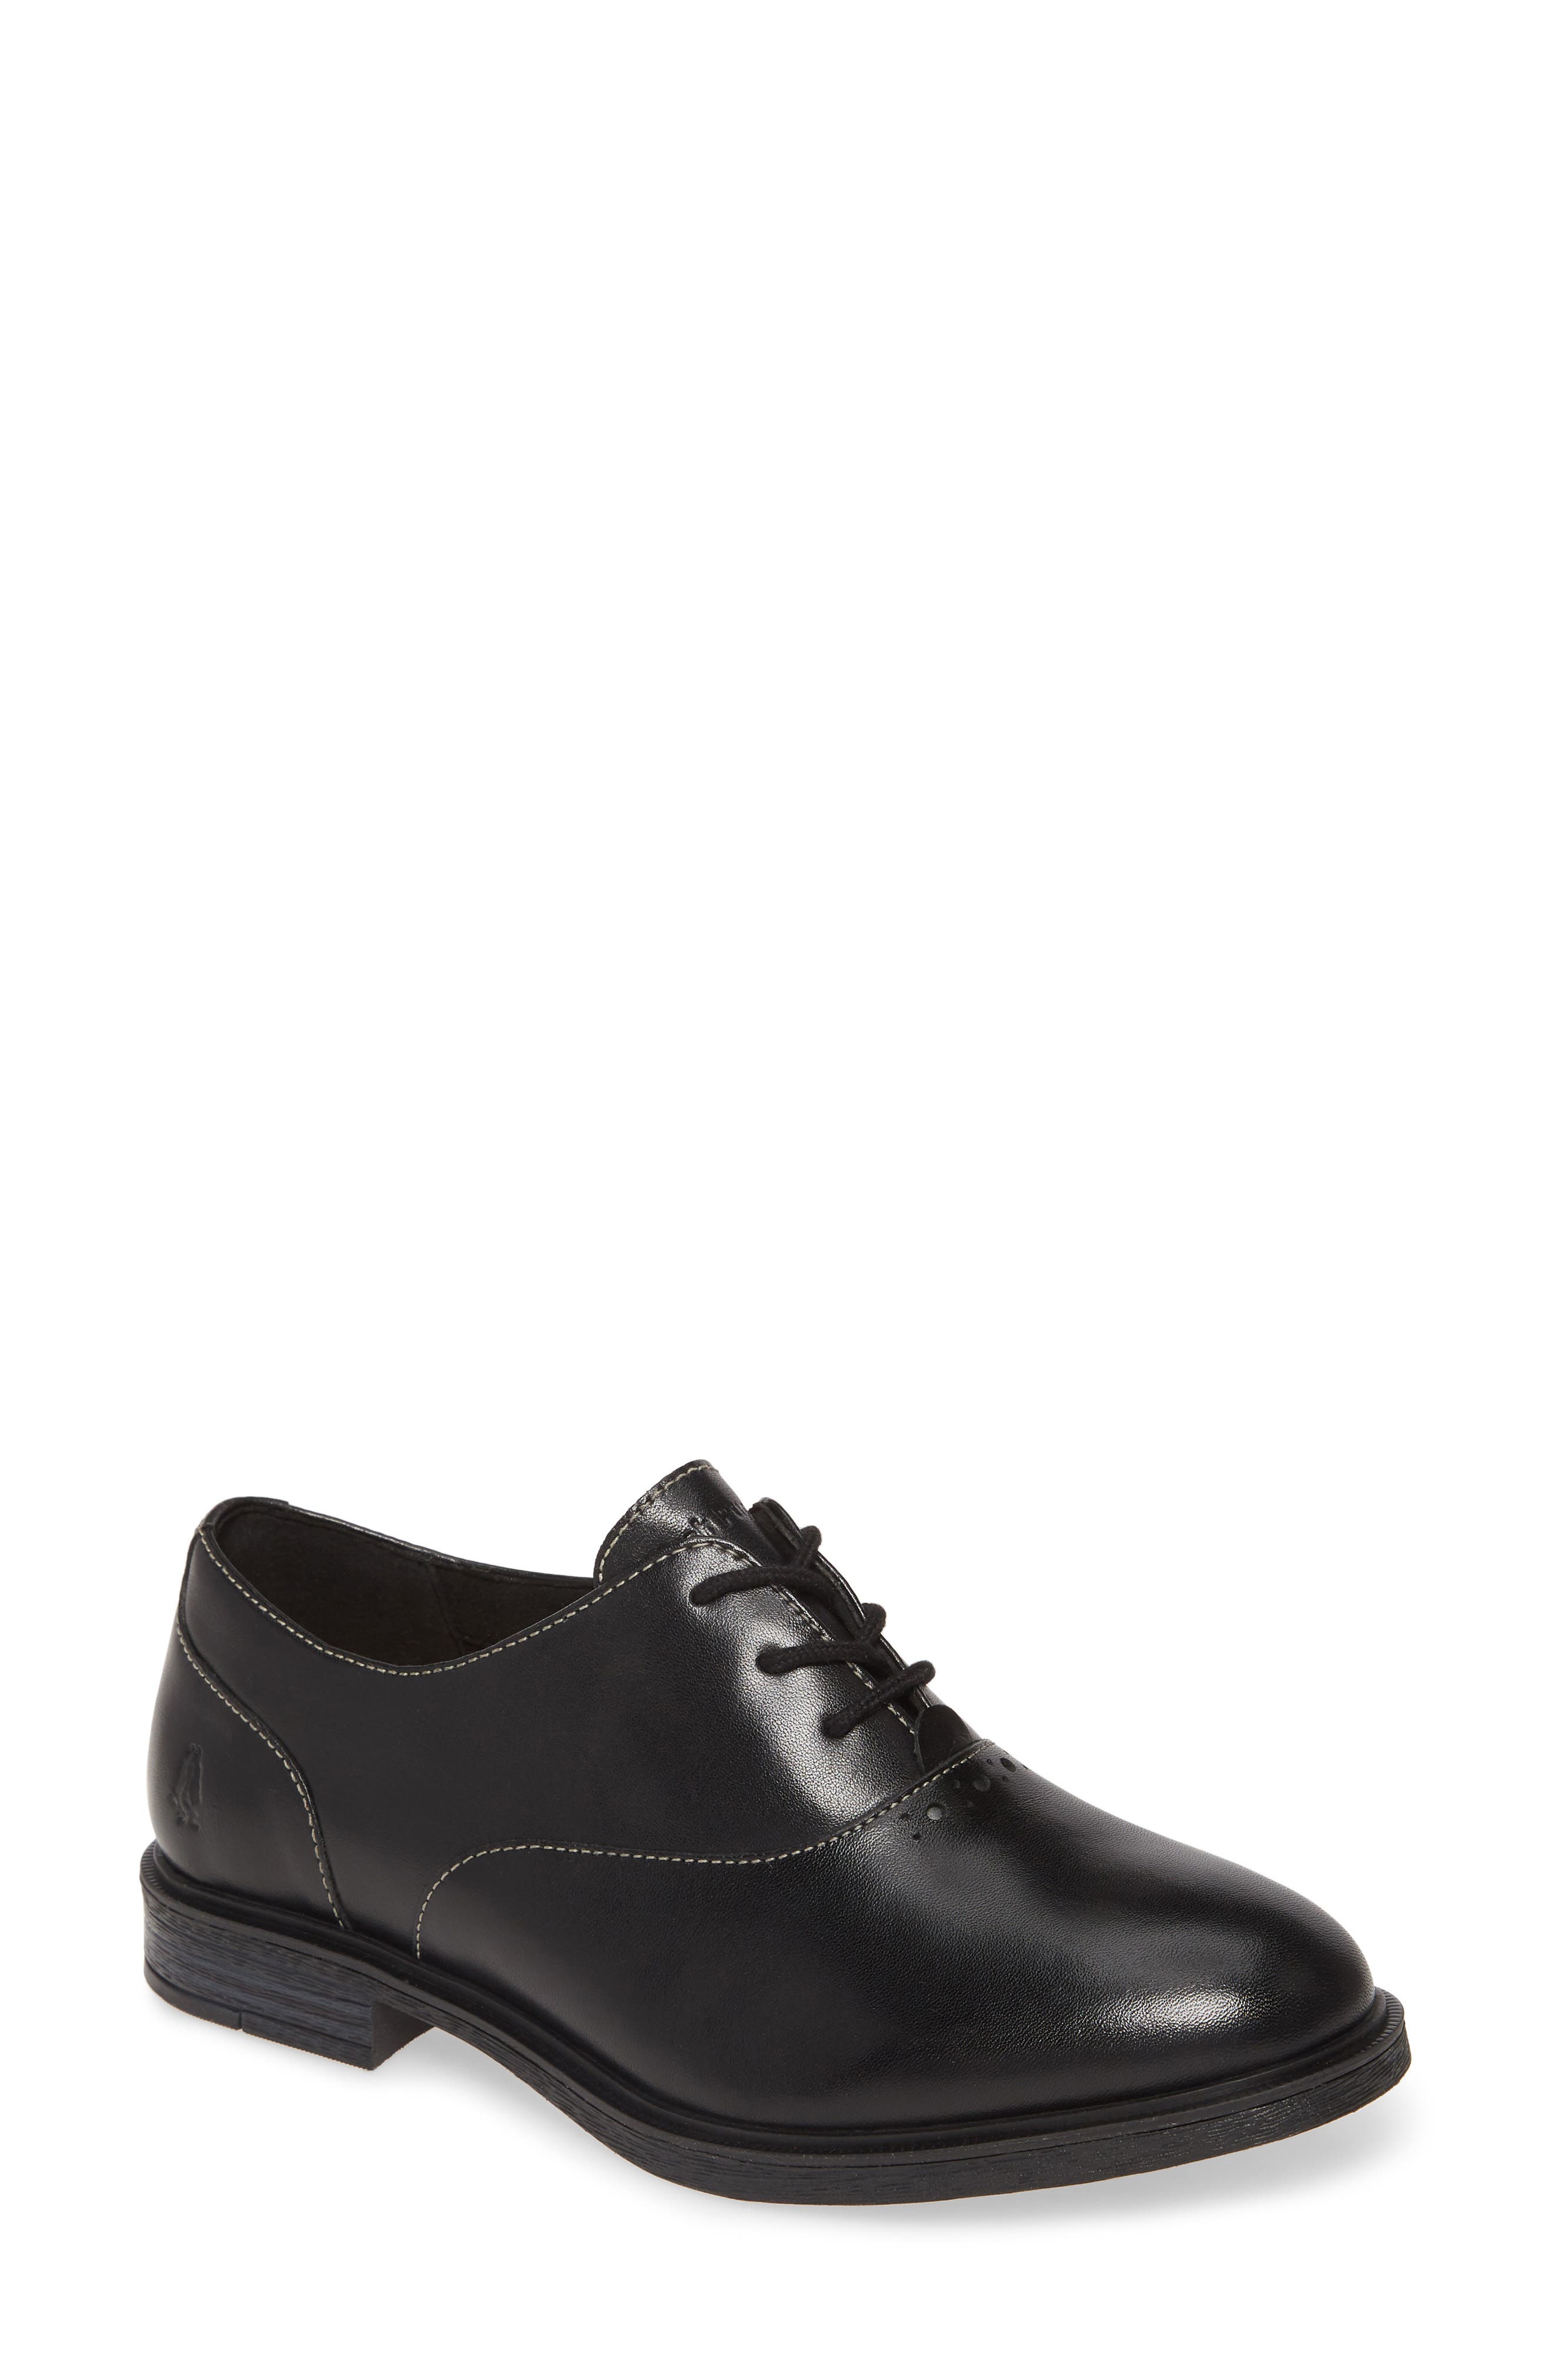 hush puppies oxfords womens